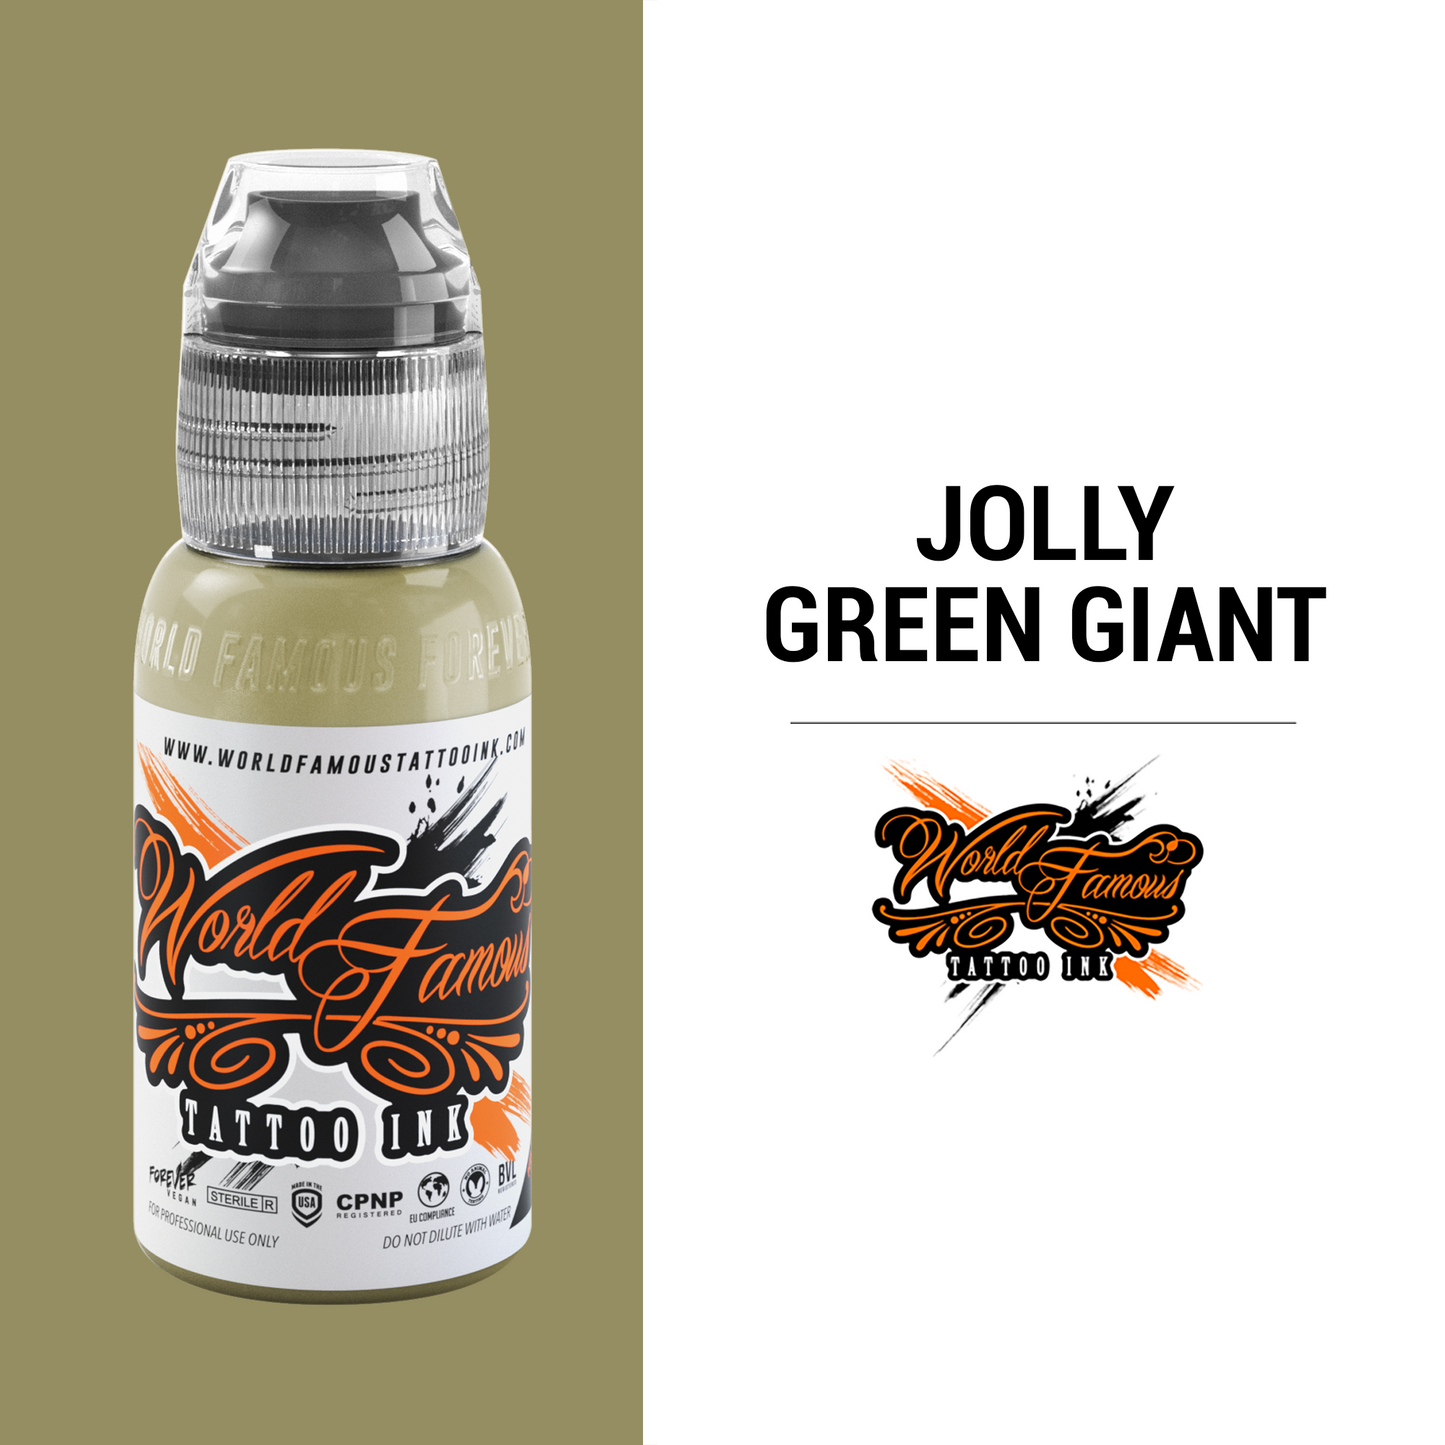 Jolly Green Giant | World Famous Tattoo Ink